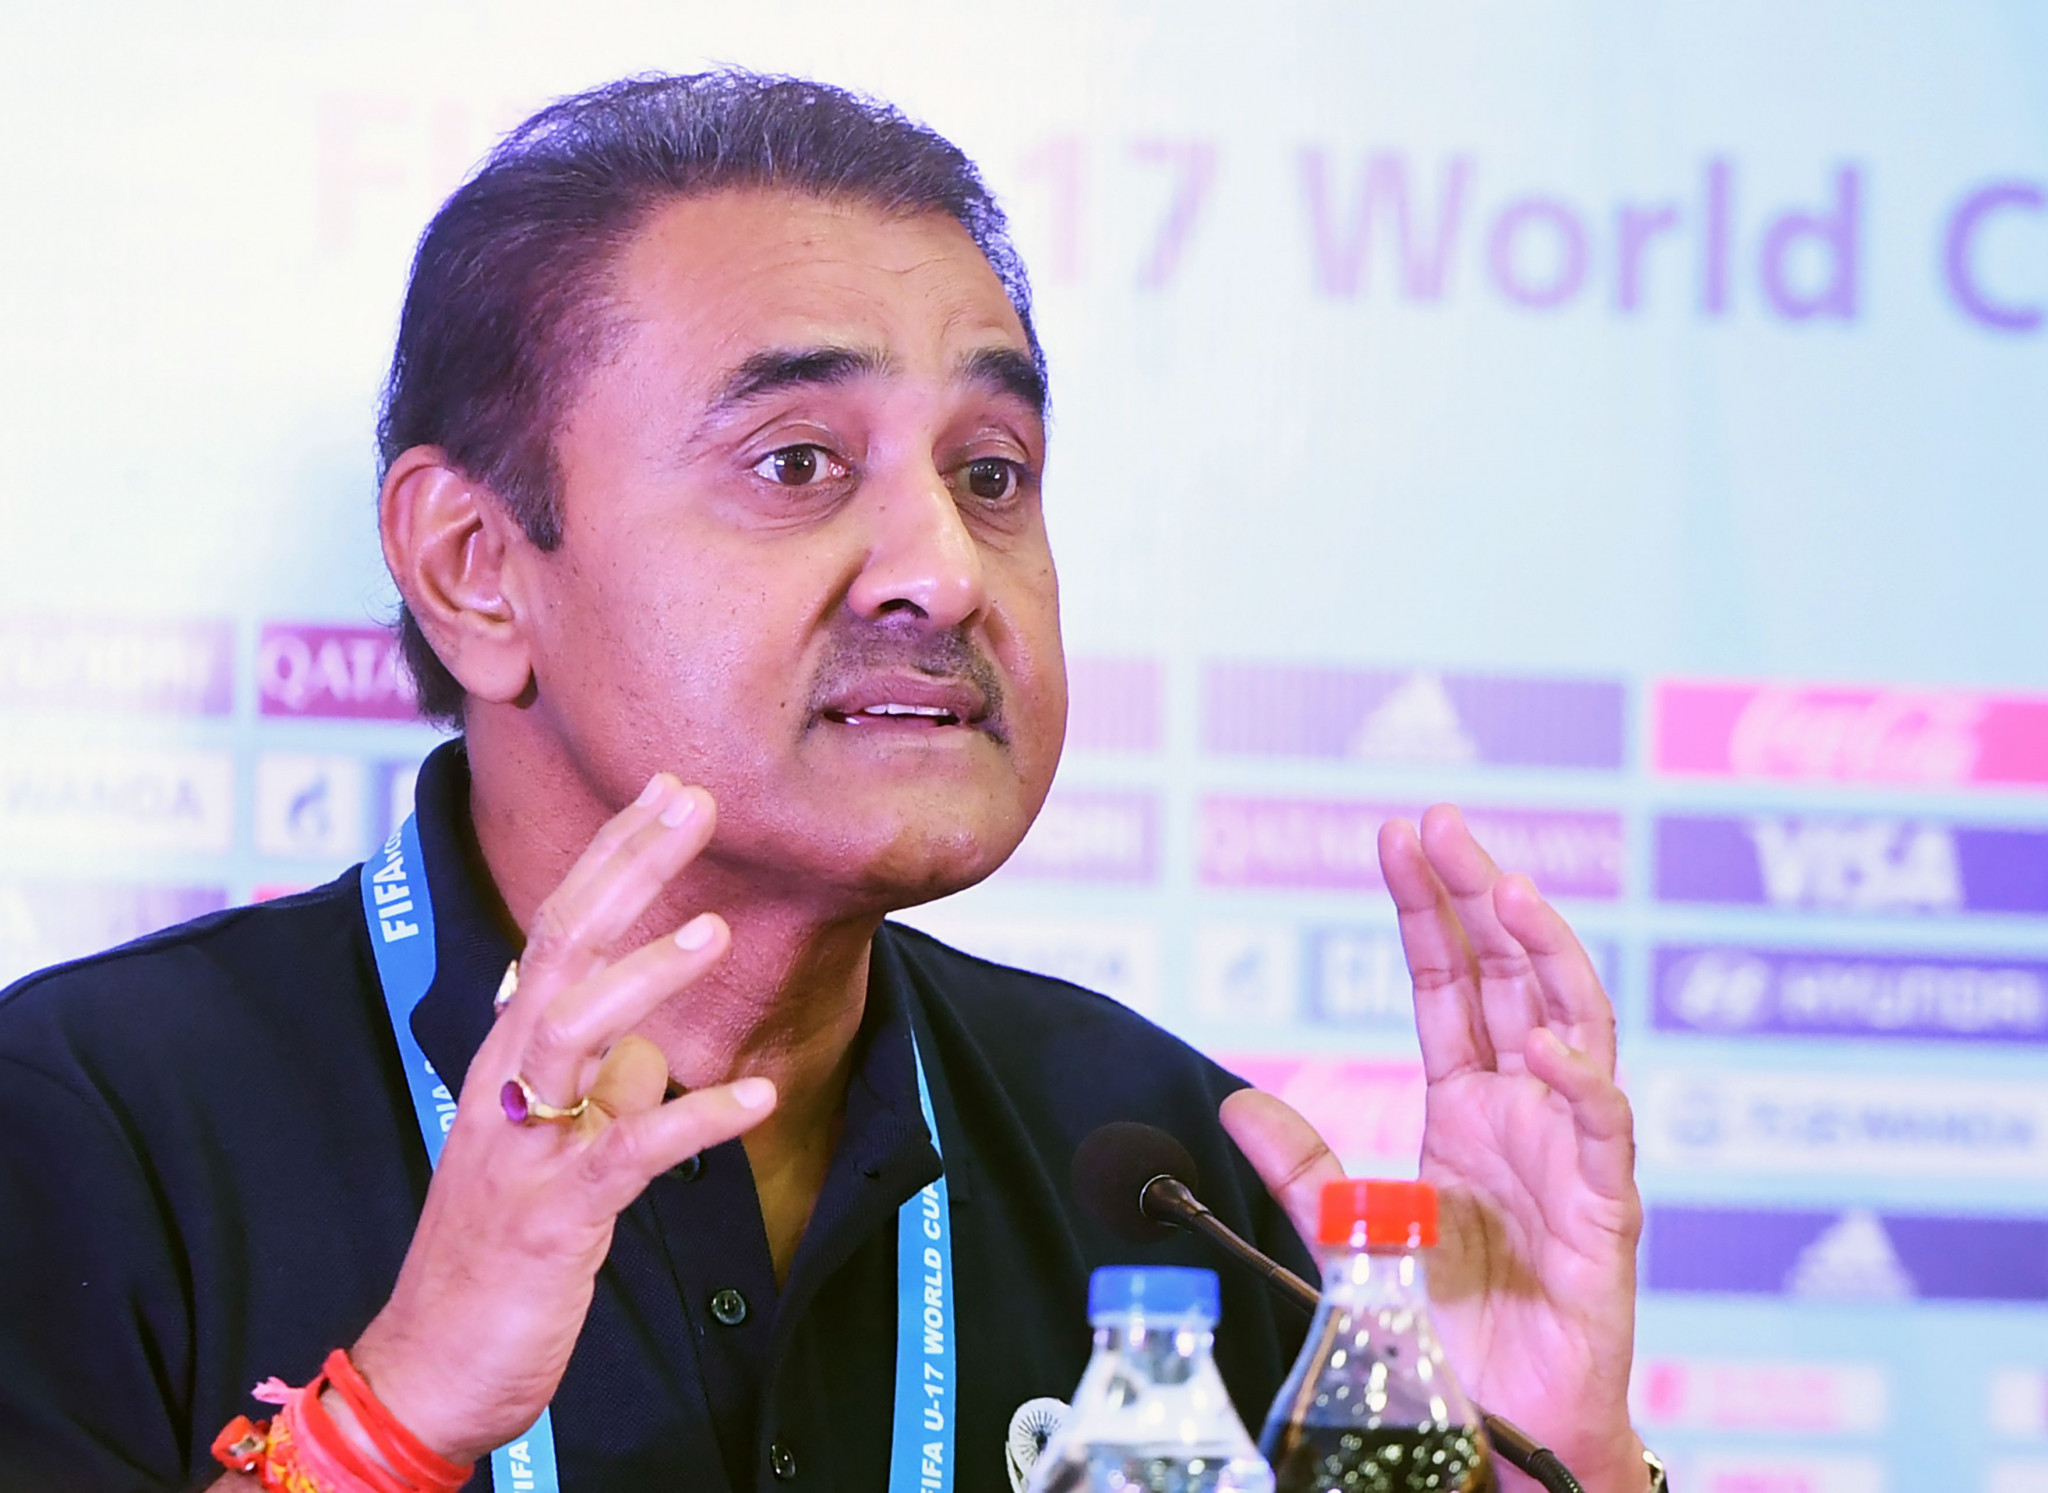 All India Football Federation President Praful Patel said a bid has been lodged for the country to host the 2019 FIFA Under-20 World Cup ©Getty Images